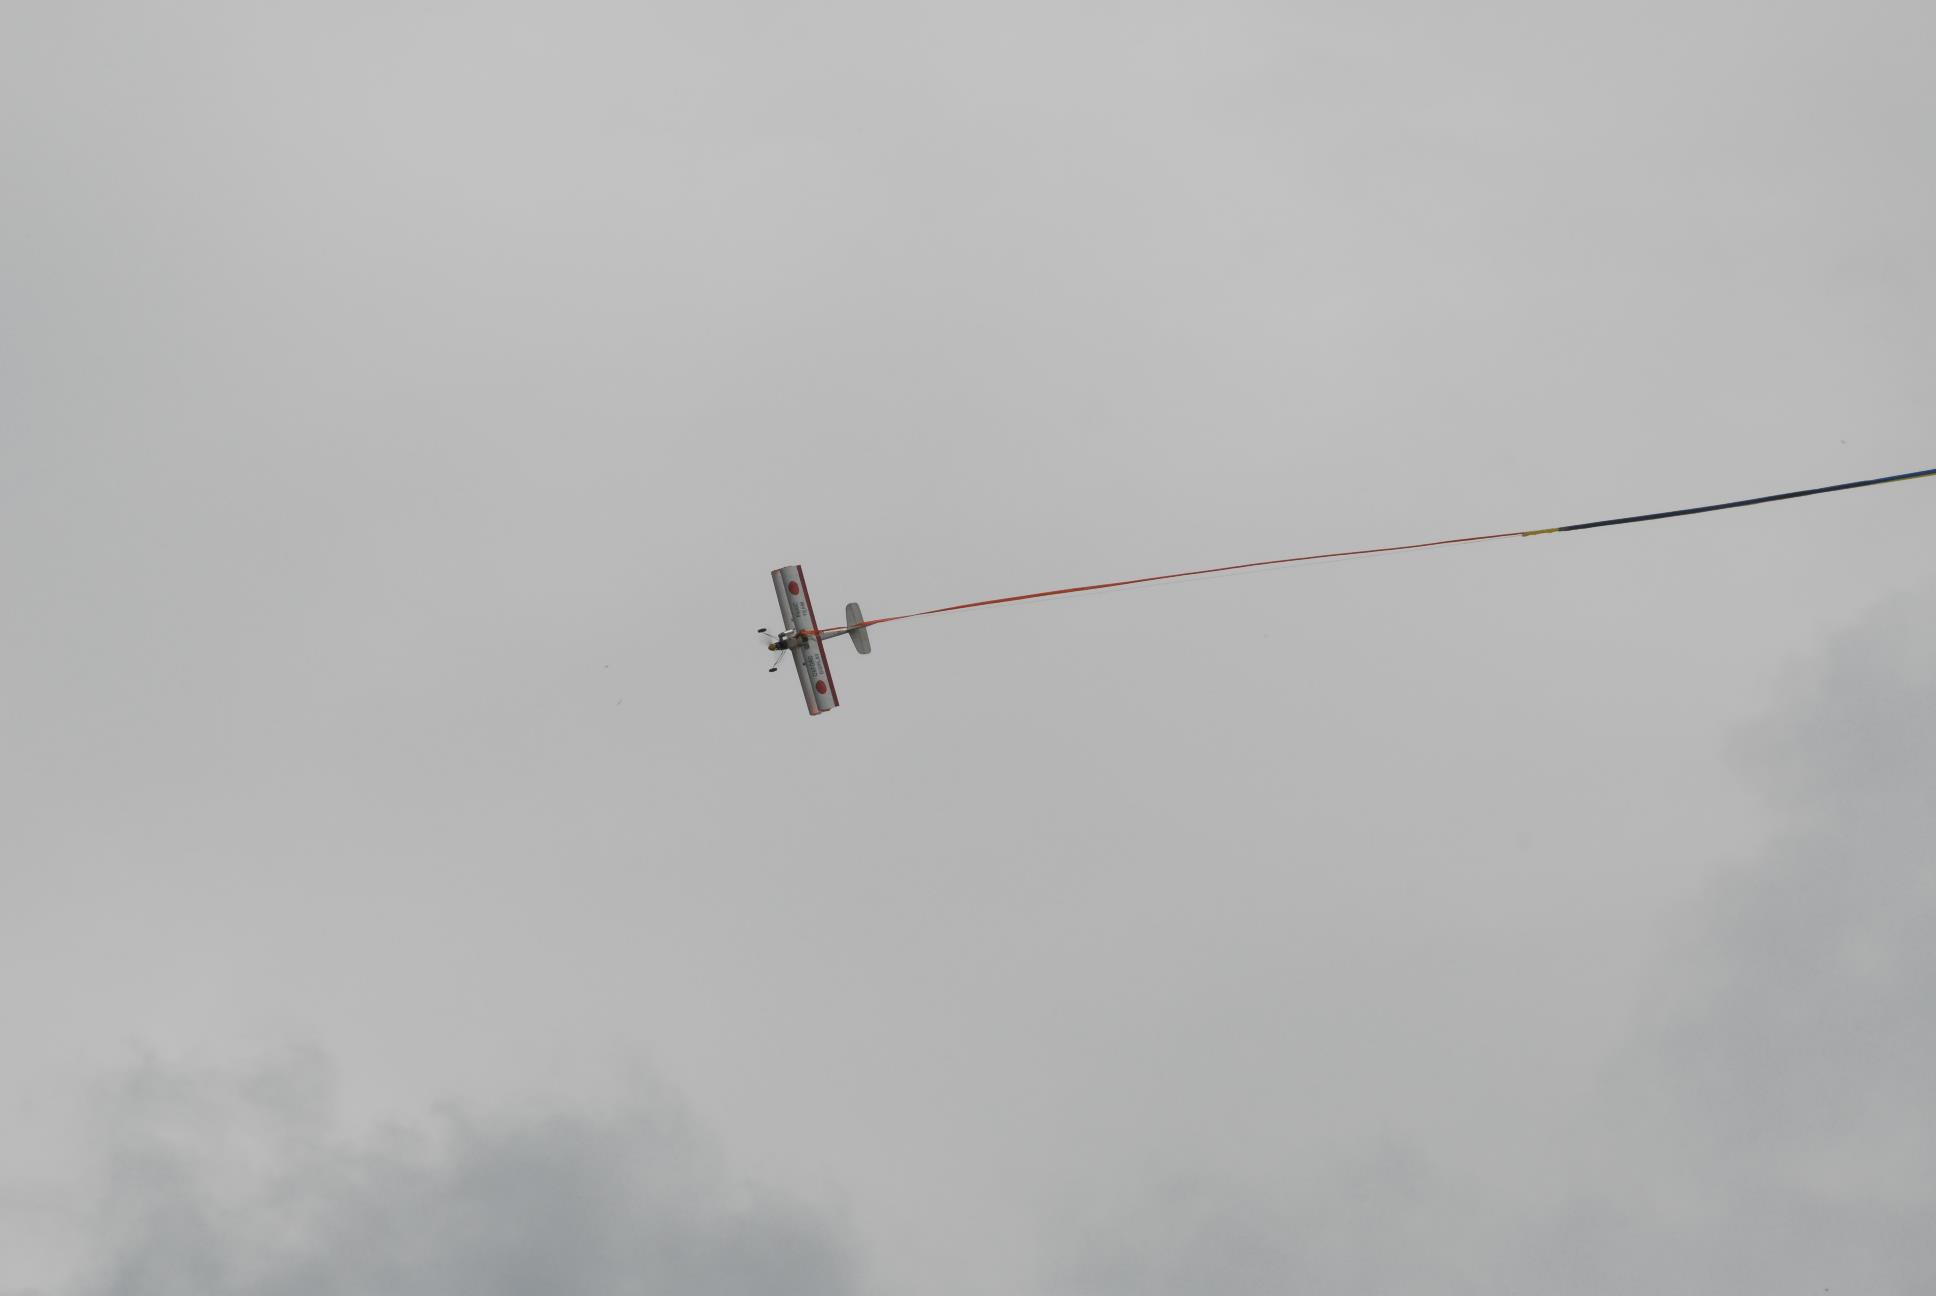 a kite with a long red rope attached to it